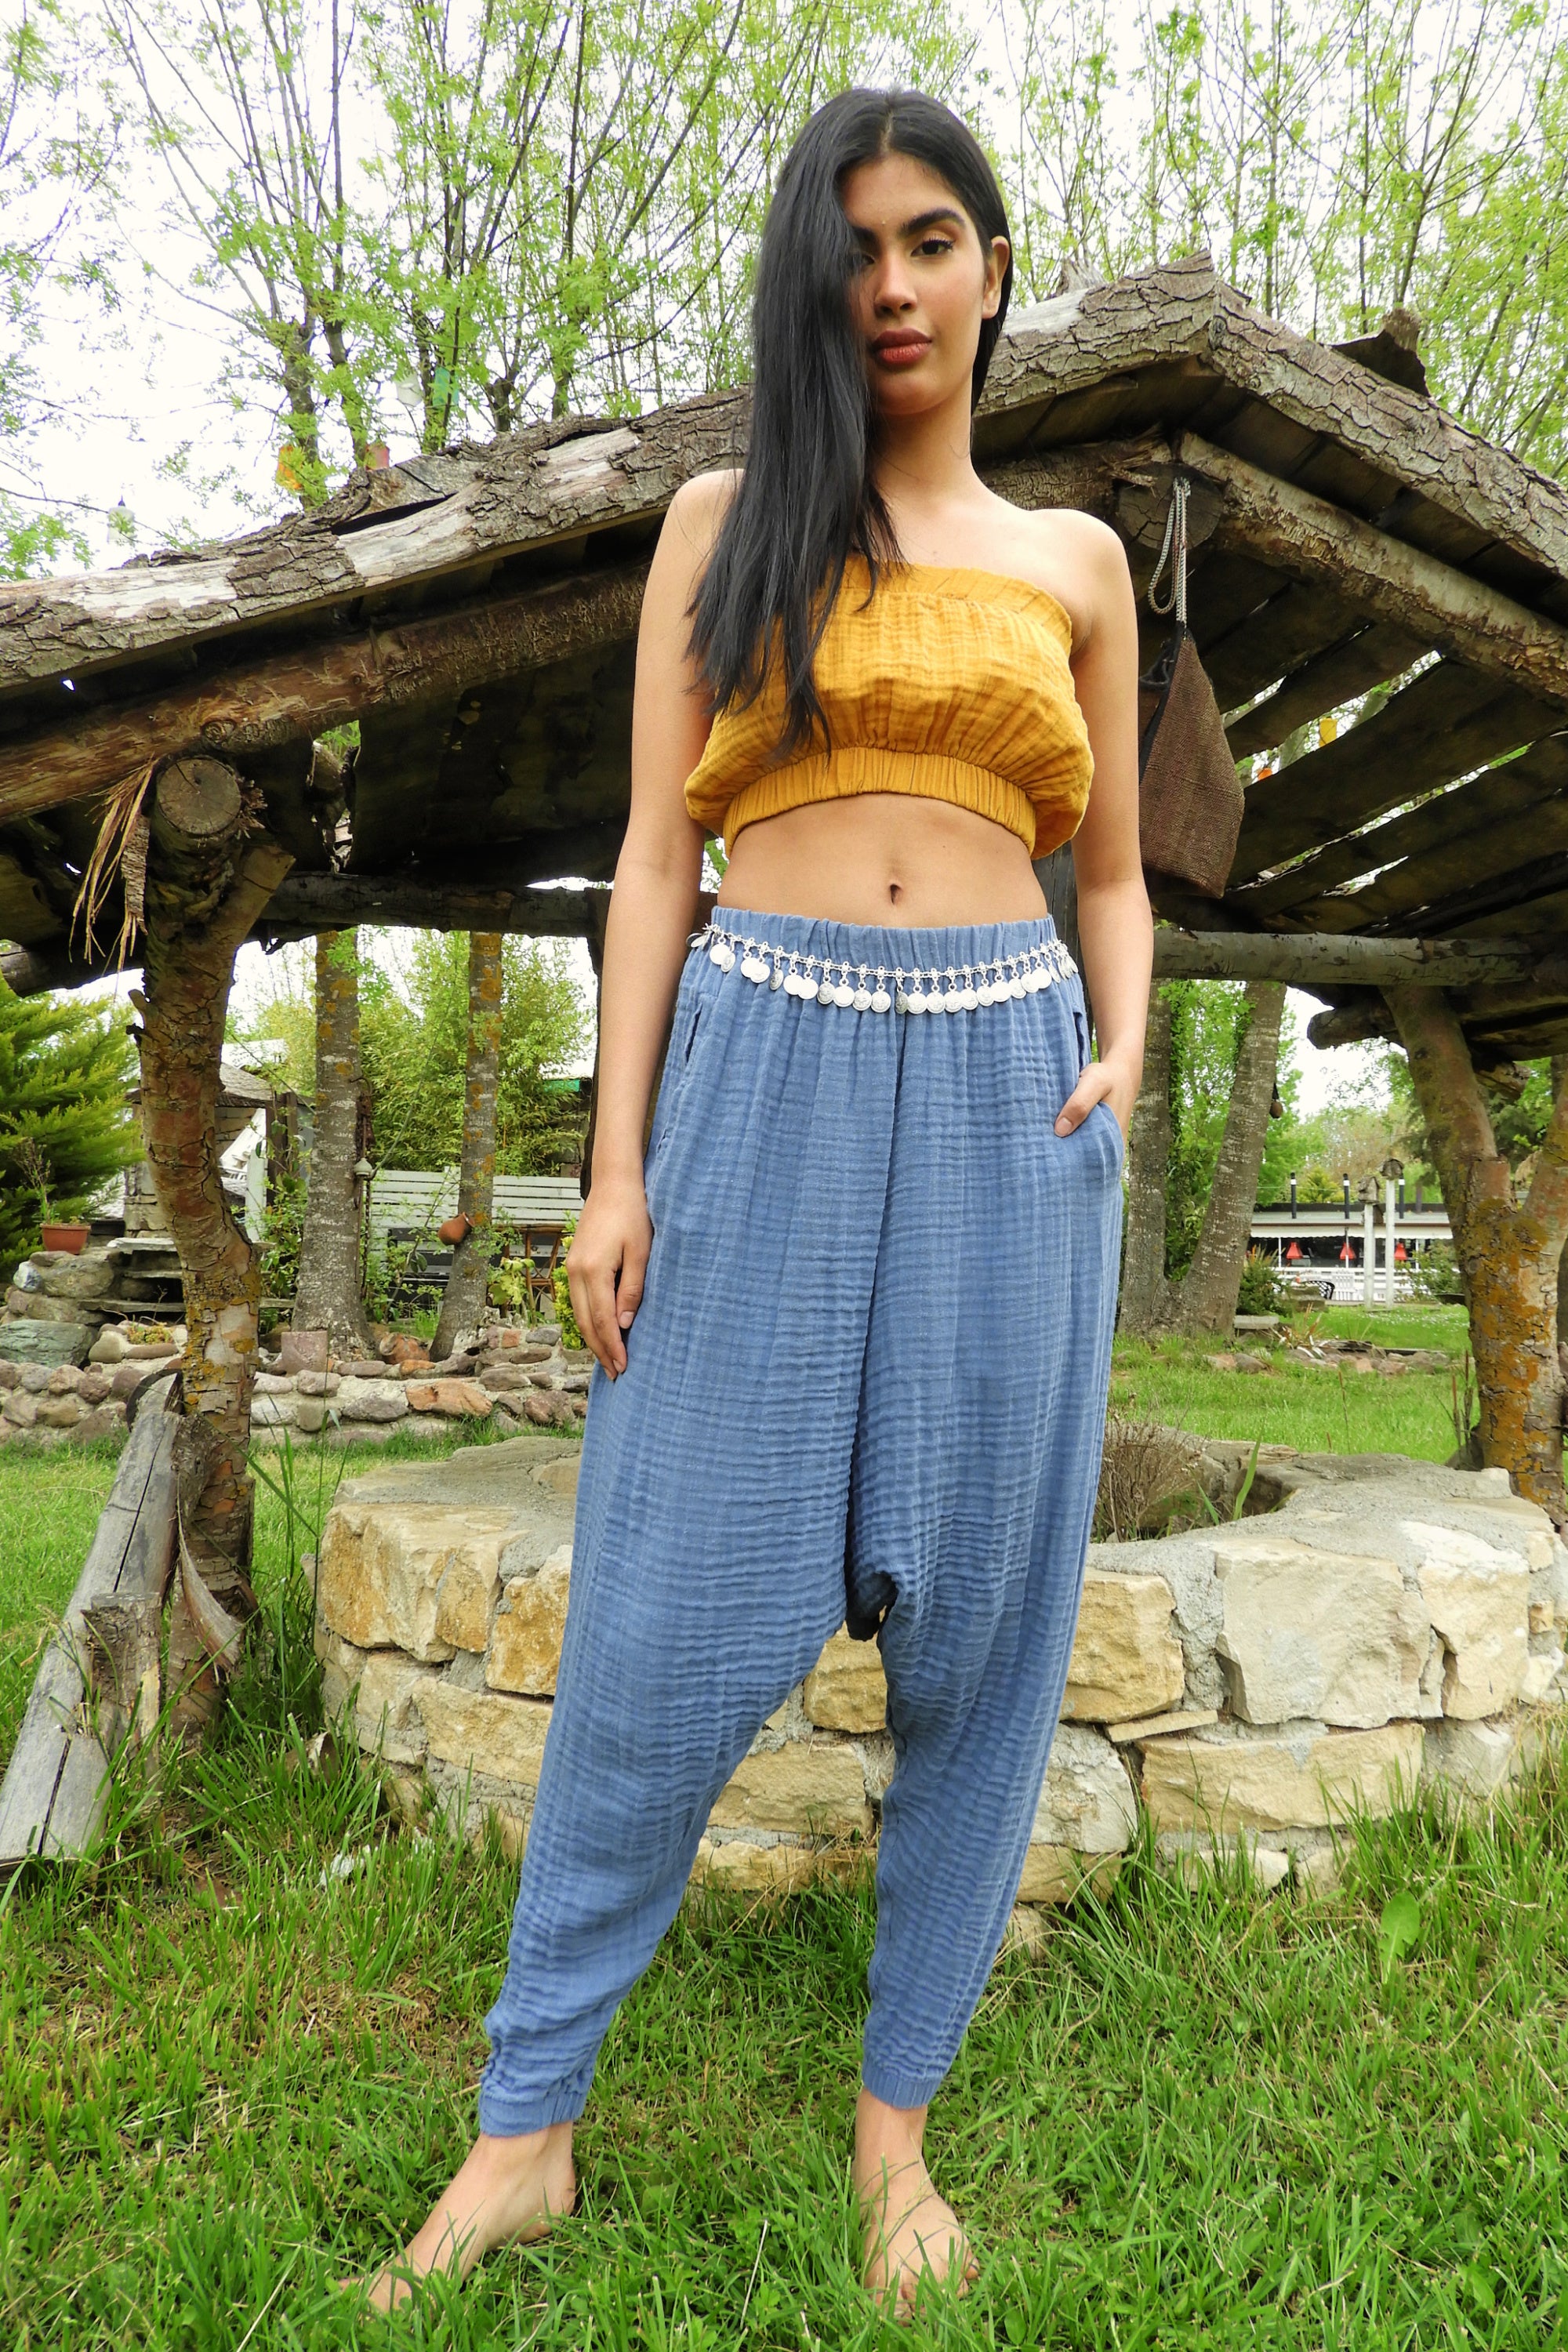 Sure Design Traditional Prints Thai Hill Tribe Fabric Drop Crotch Harem  Pants with Ankle Straps